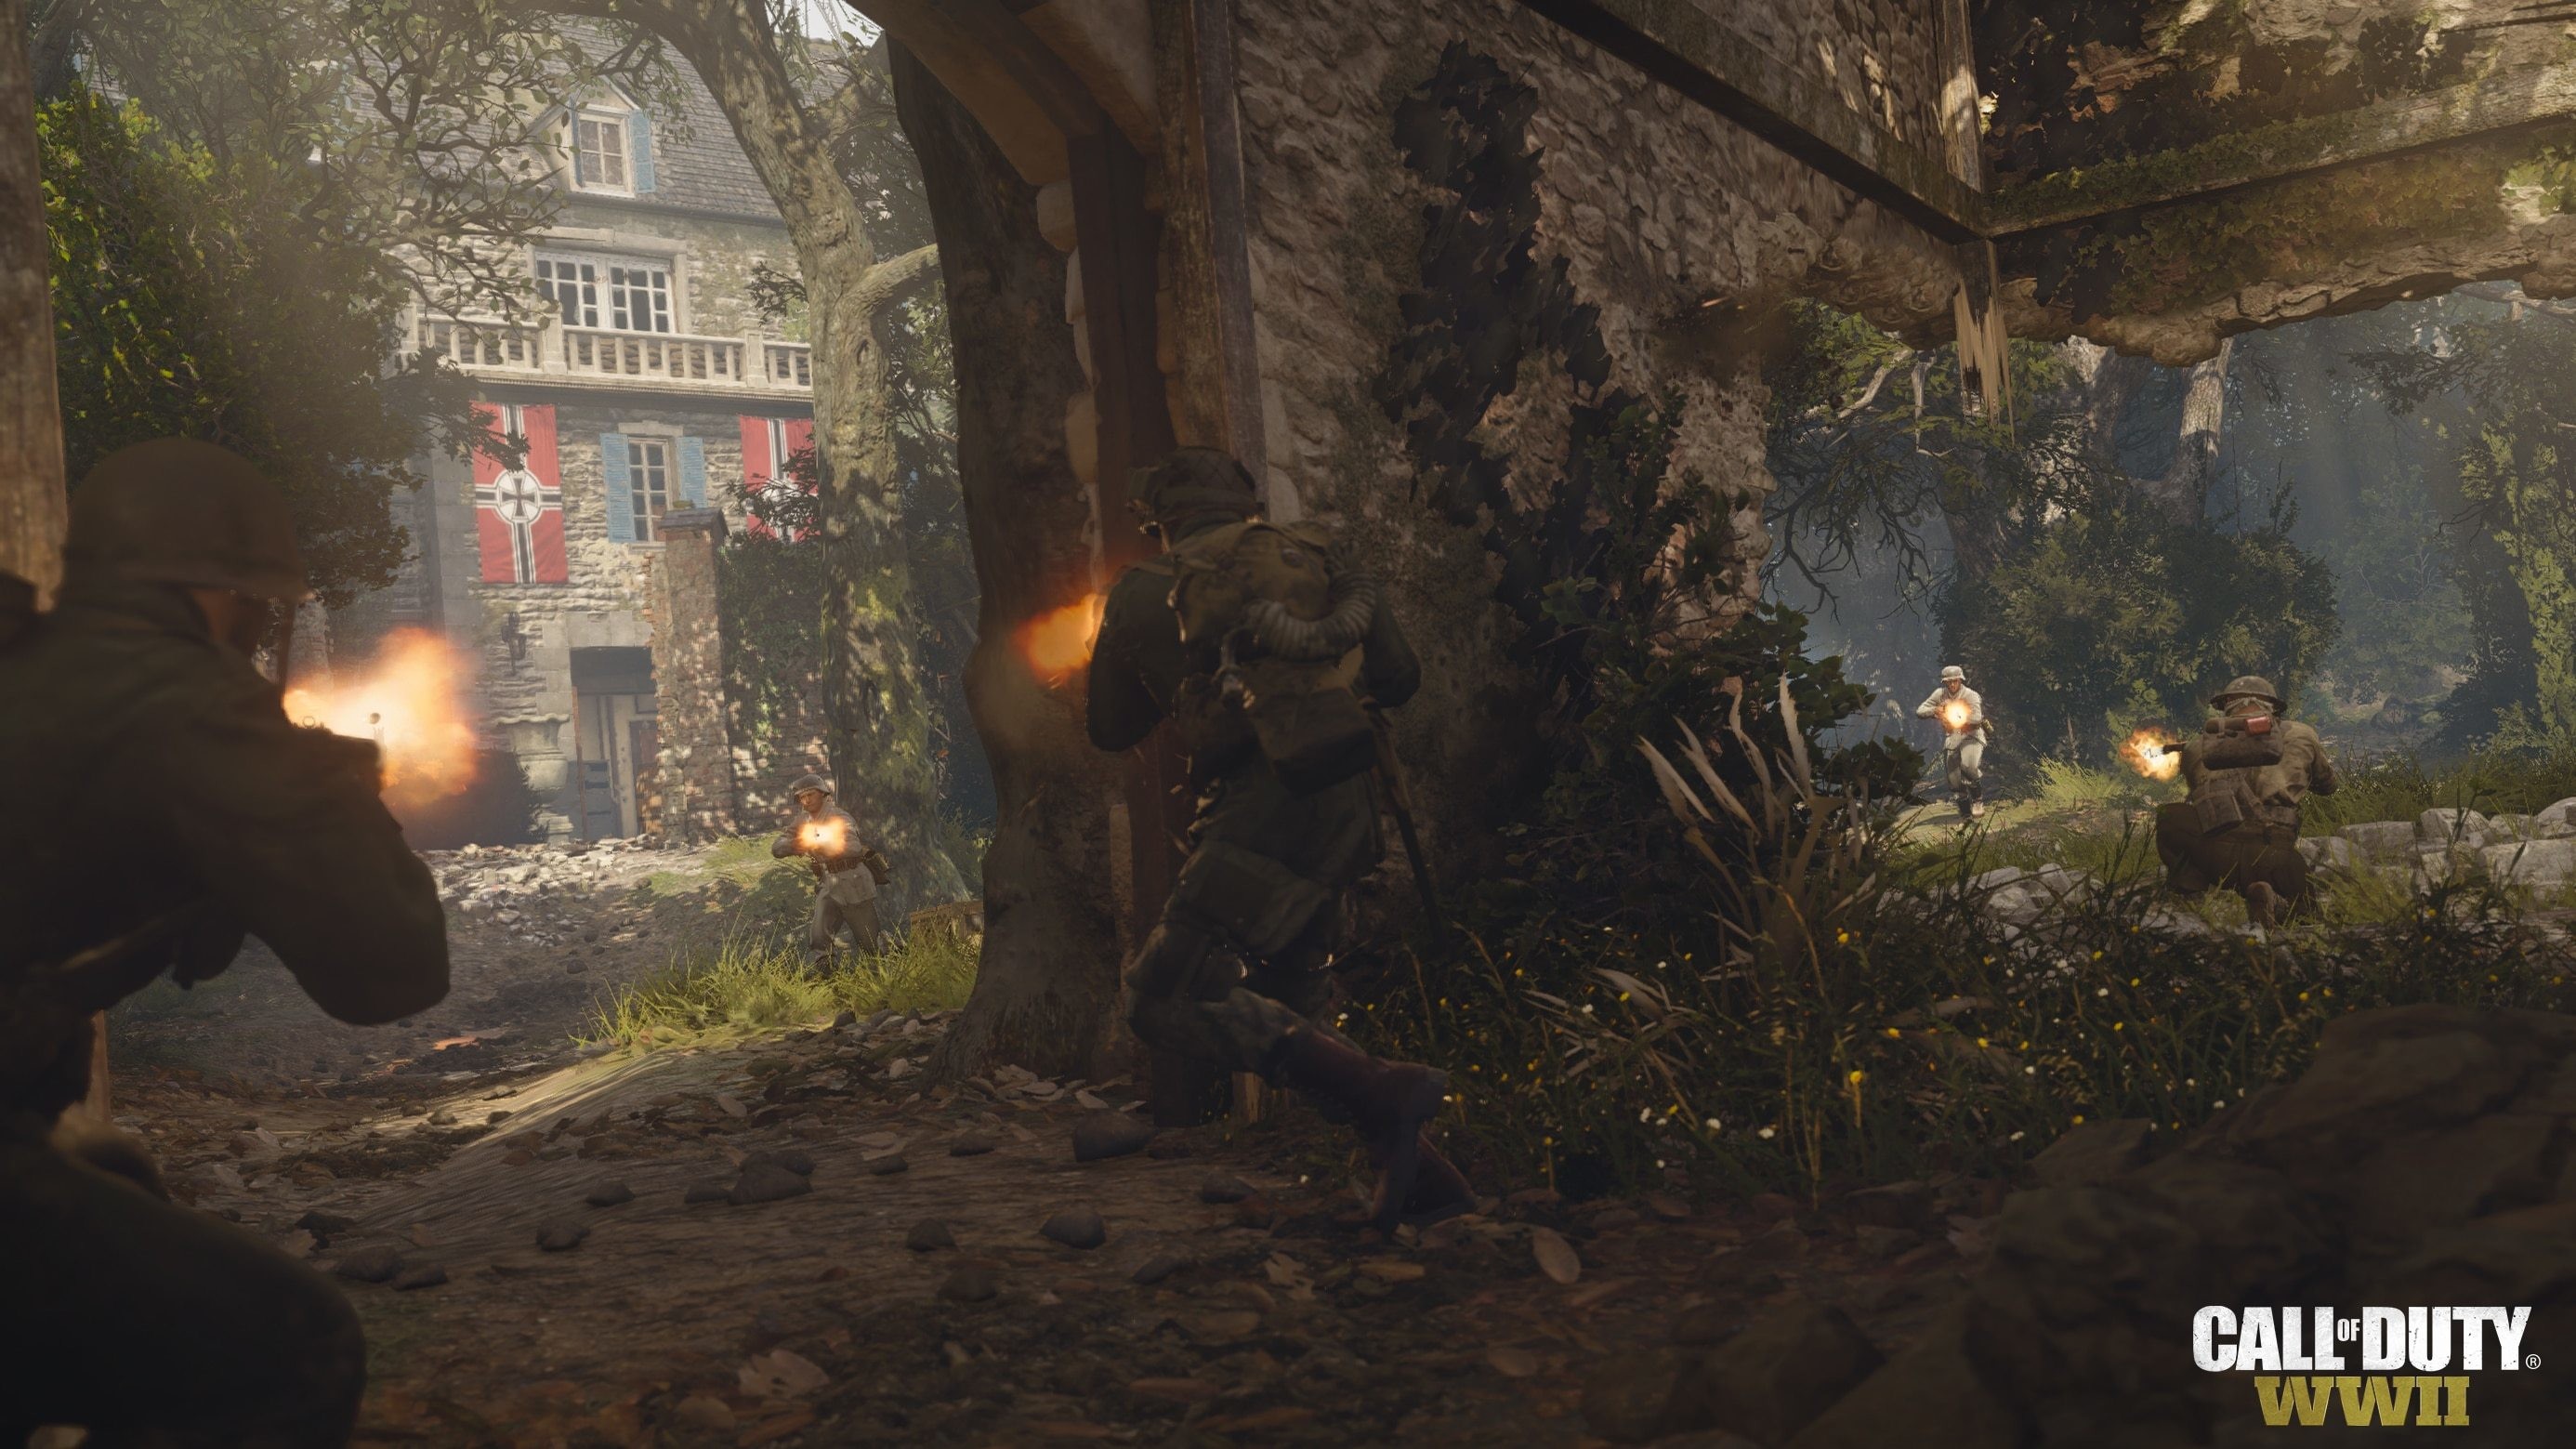 2772x1559 In it you will see the different maps, characters, atmosphere and much  more. Let me know what you think of the Call of Duty WW2 Screenshots below: